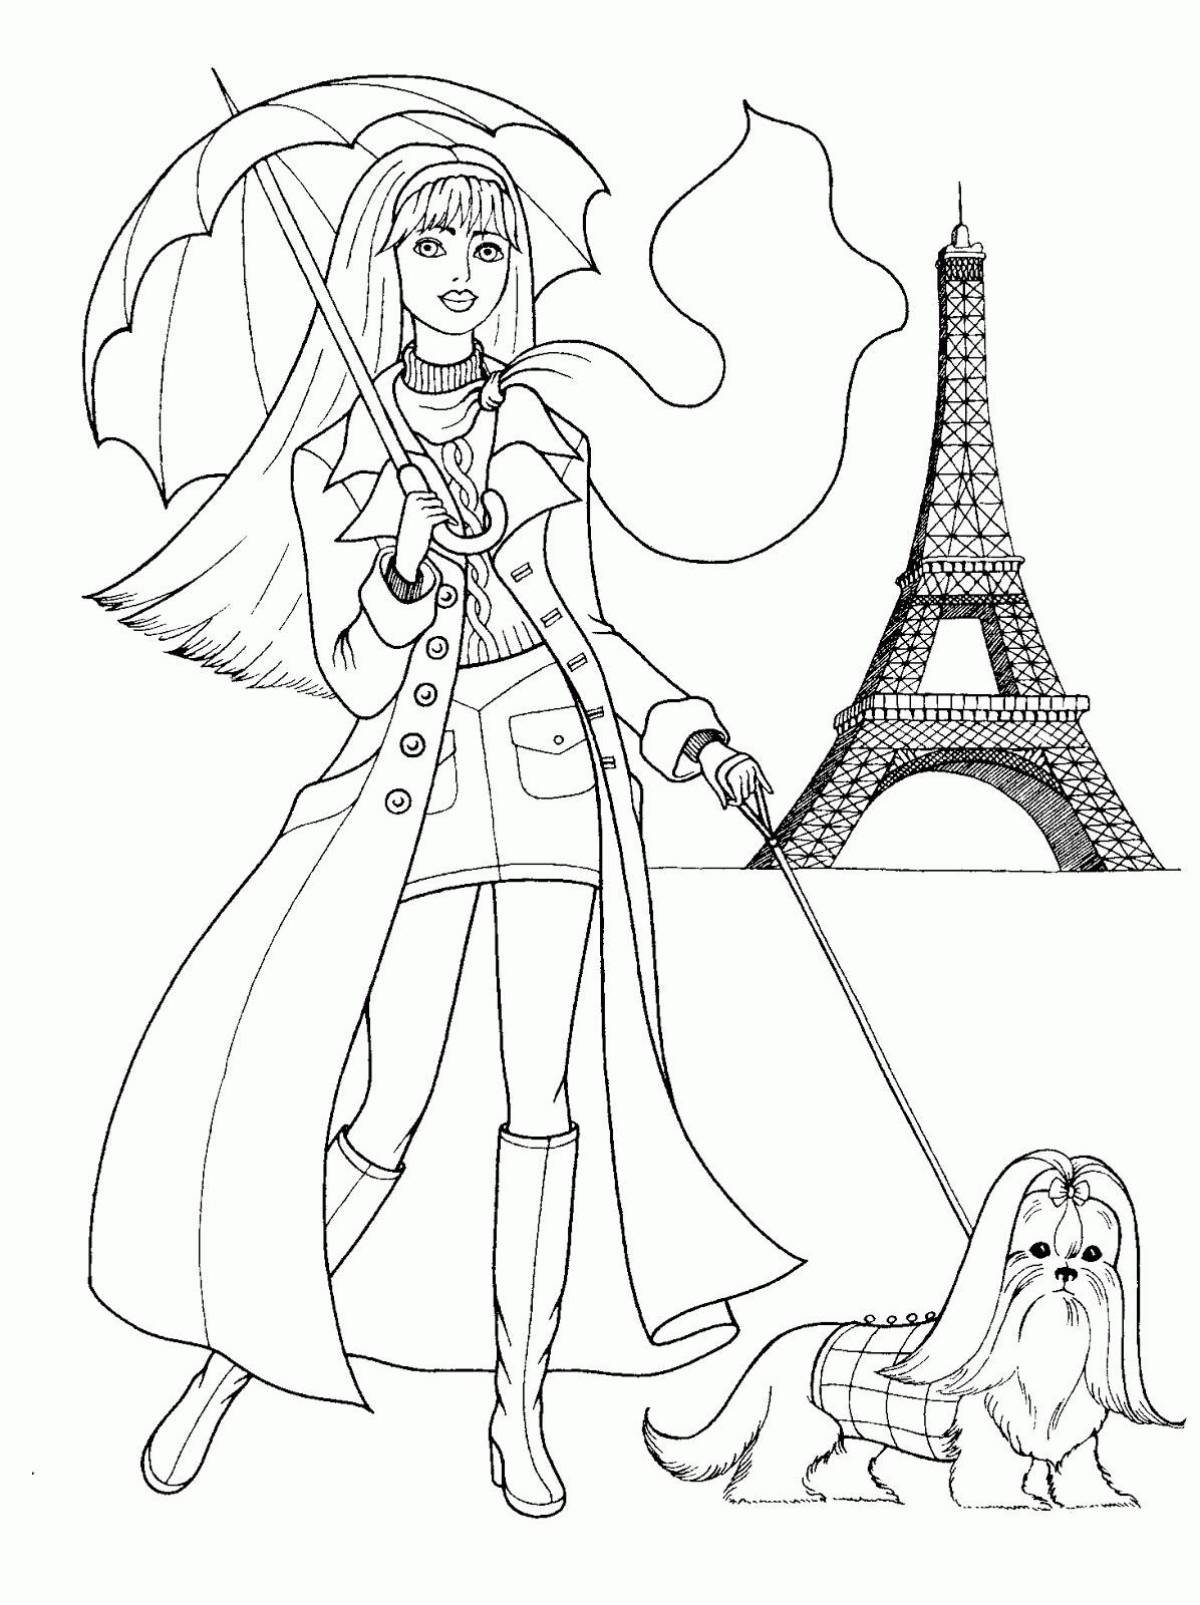 Coloring pages for children 12-13 years old